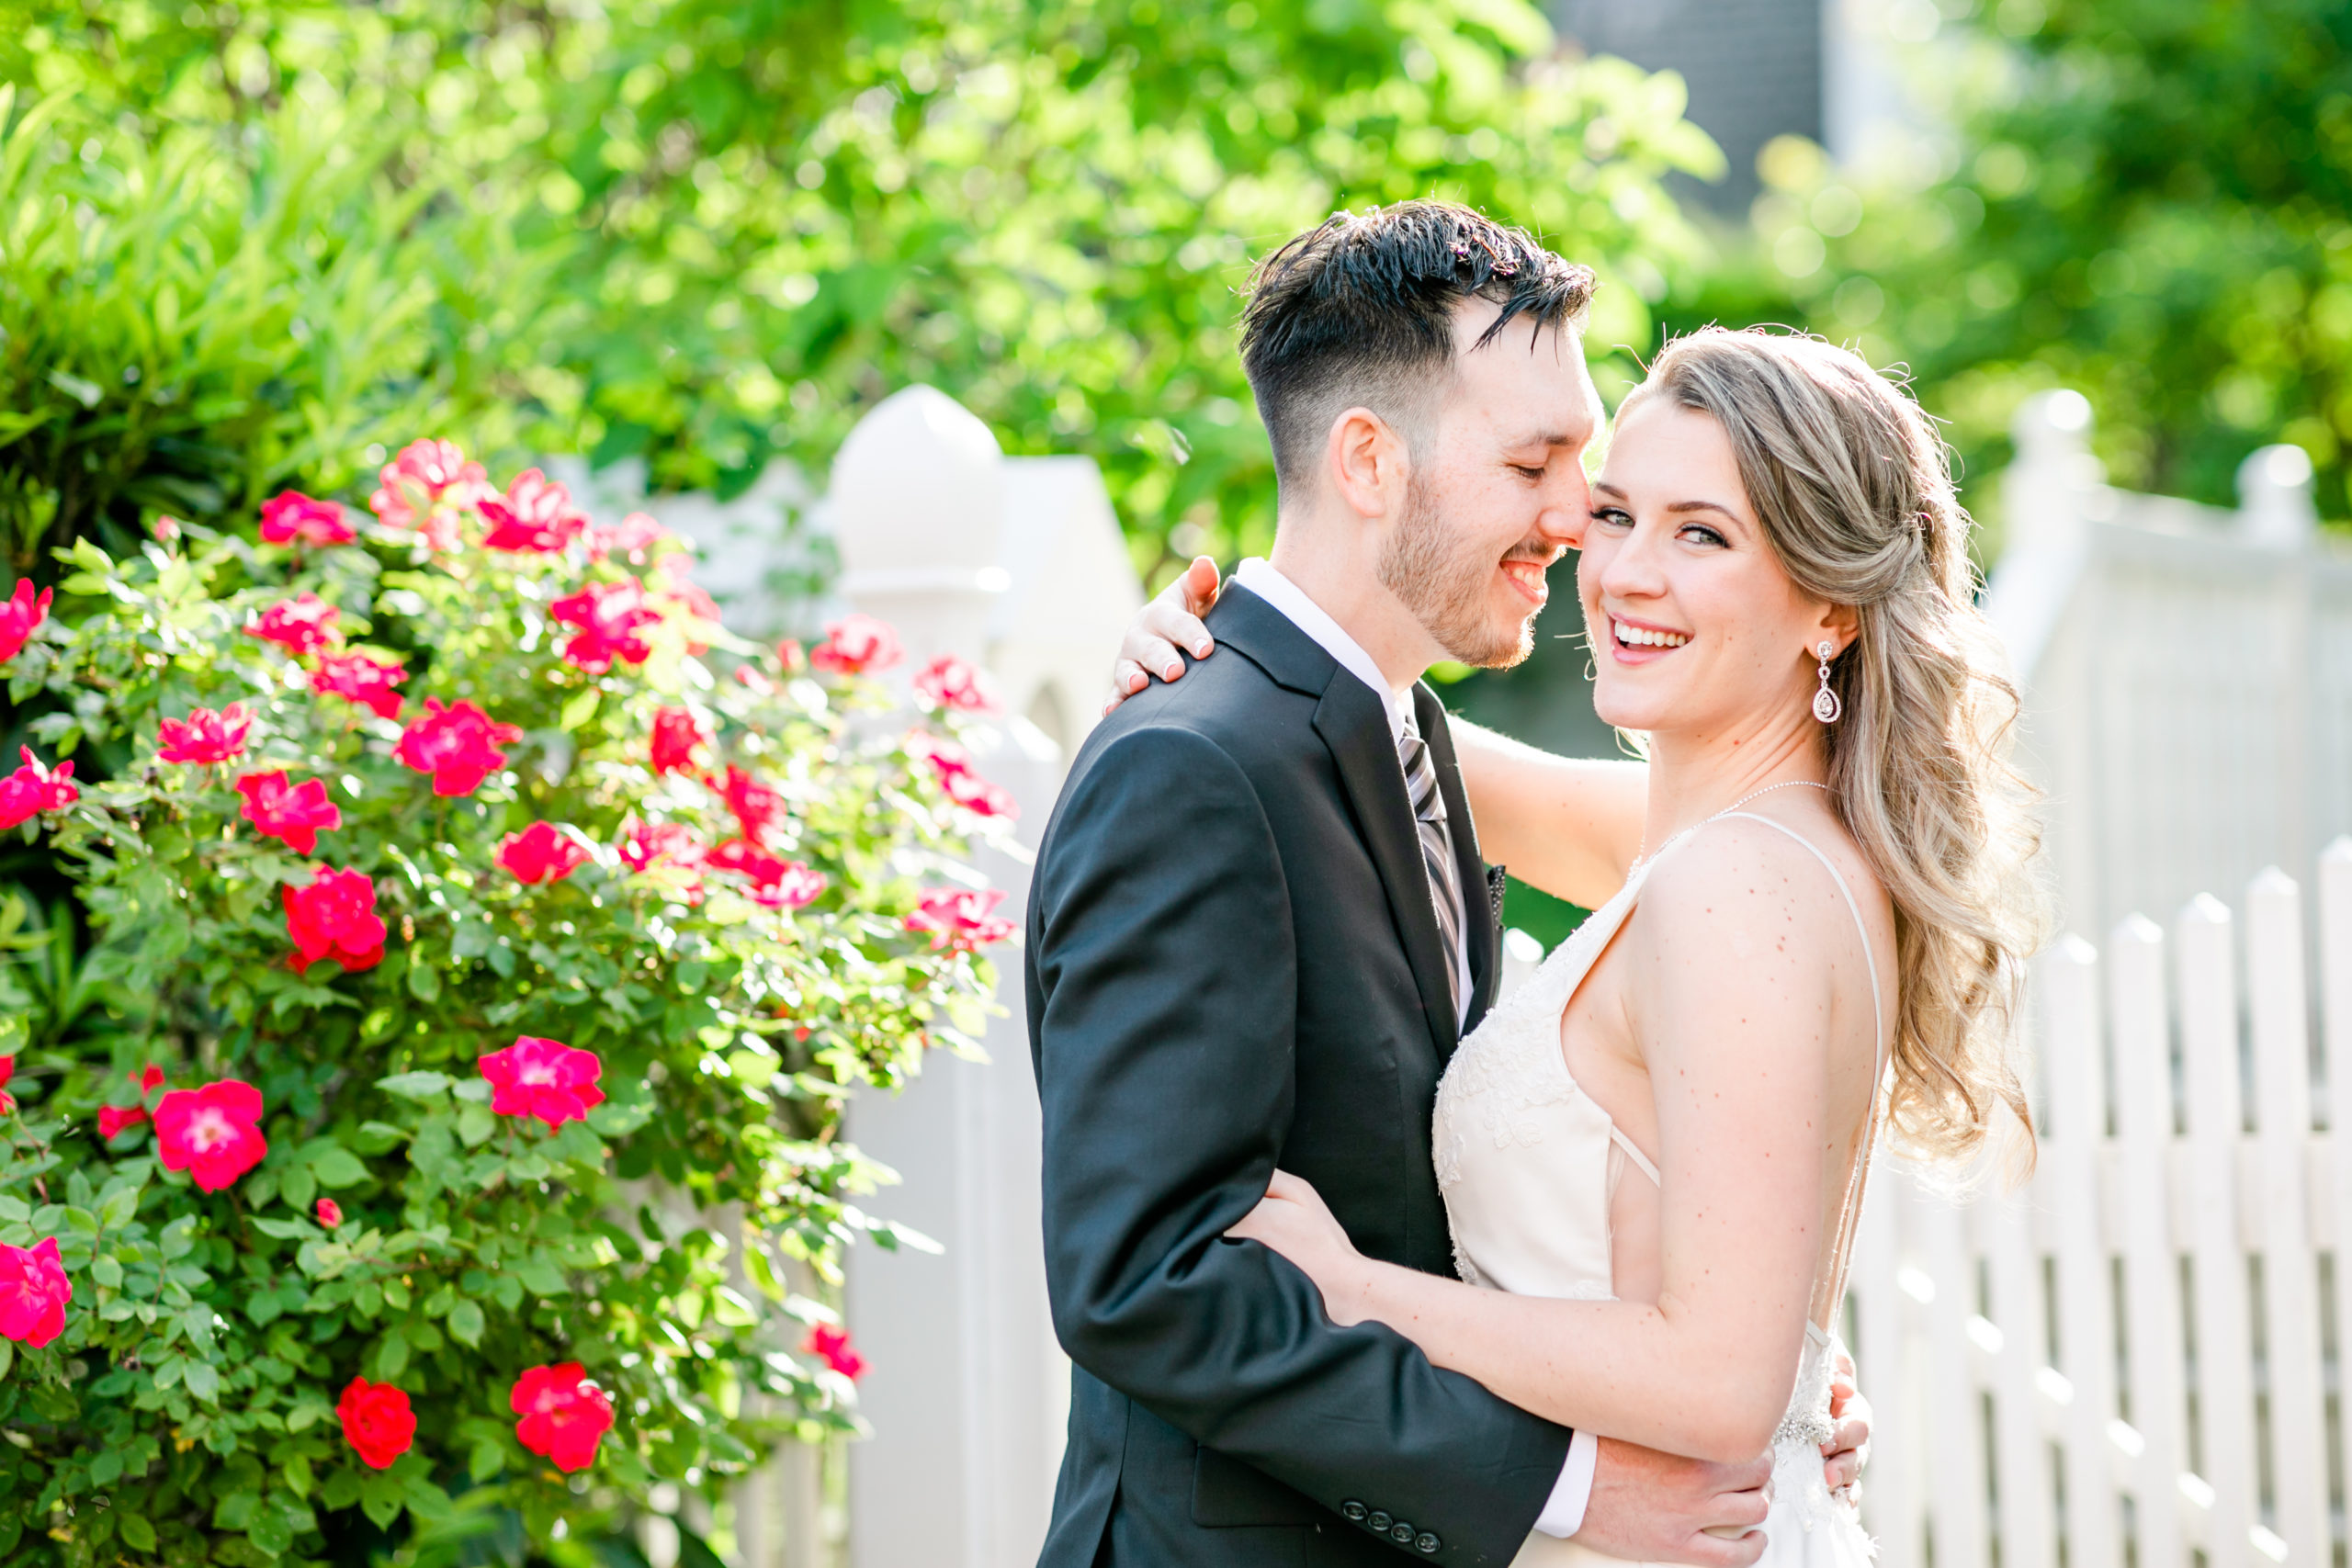 glowing spring Alexandria elopement, Alexandria wedding photographer, Old Town wedding photographer, Old Town Alexandria, Old Town wedding, spring wedding, DC area wedding, DC wedding photographer, Rachel E.H. Photography, classic bride and groom, bride and groom portraits